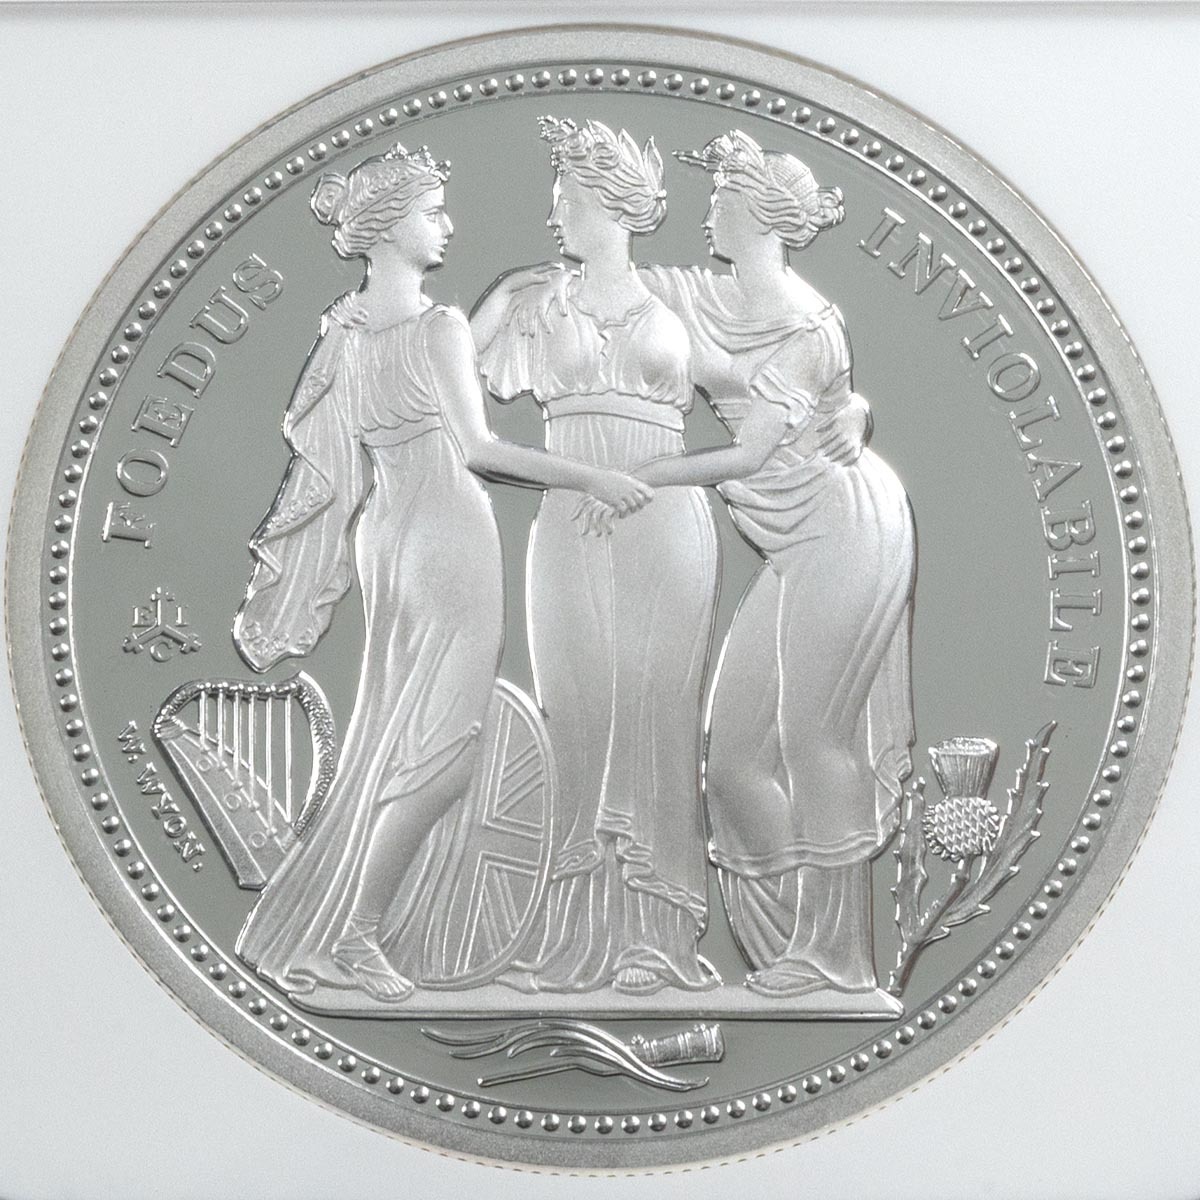 2021 St Helena Saint Helena Three Graces Two Ounce Silver Proof Coin NGC Graded PF 69 Ultra Cameo First Releases Reverse